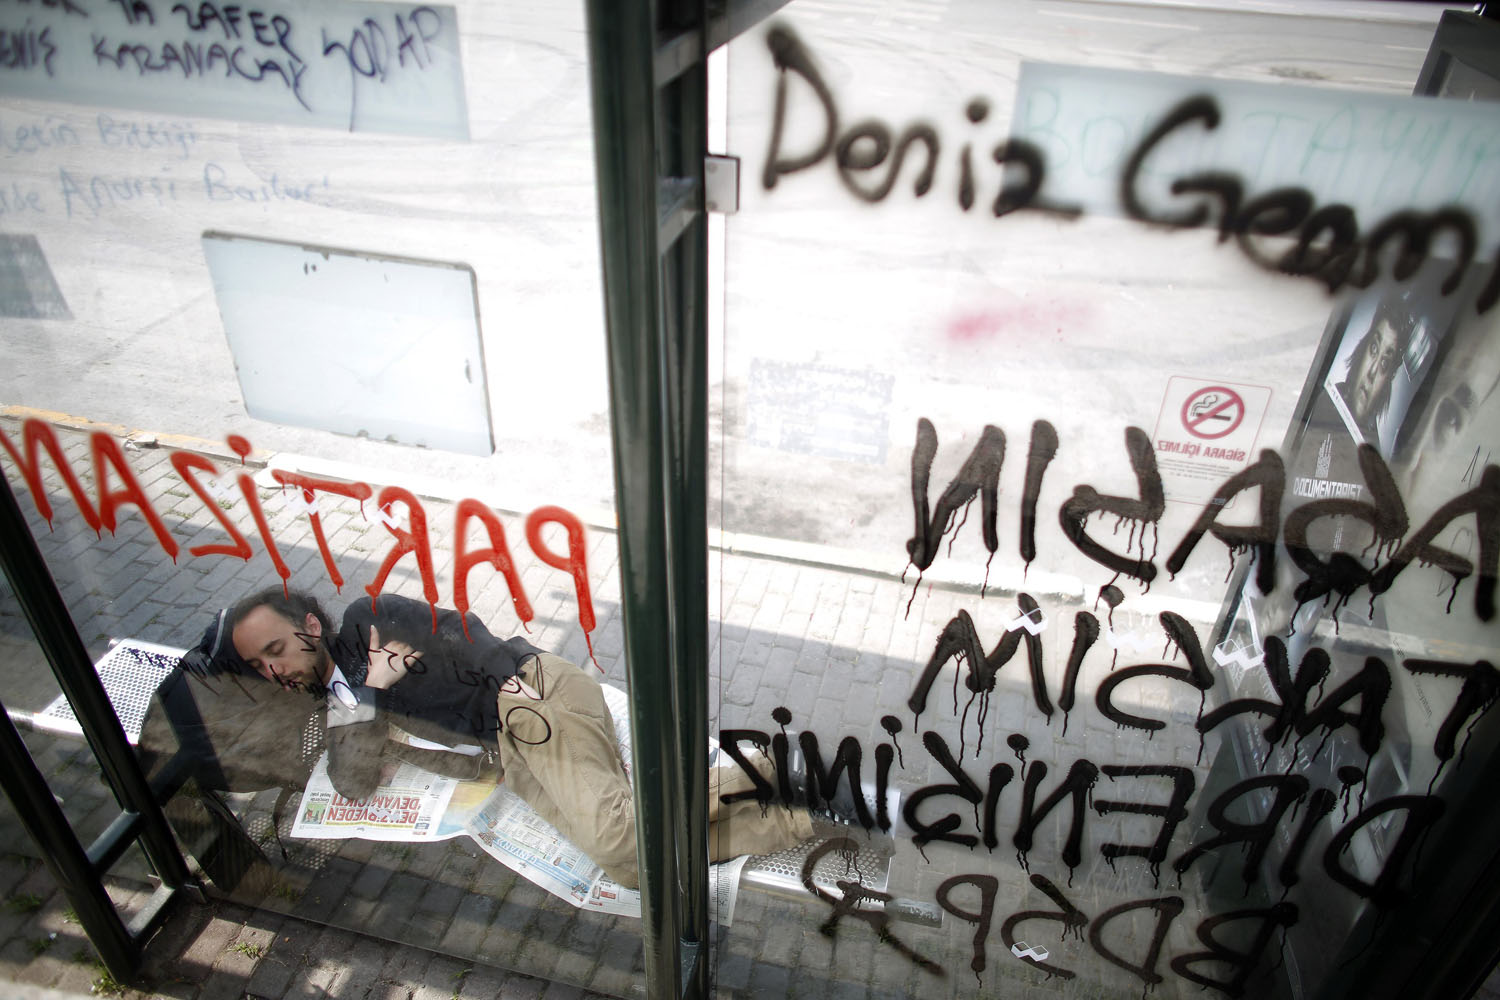 A protester sleeps at a bus stop sprayed with graffiti at Taksim Square in Istanbul